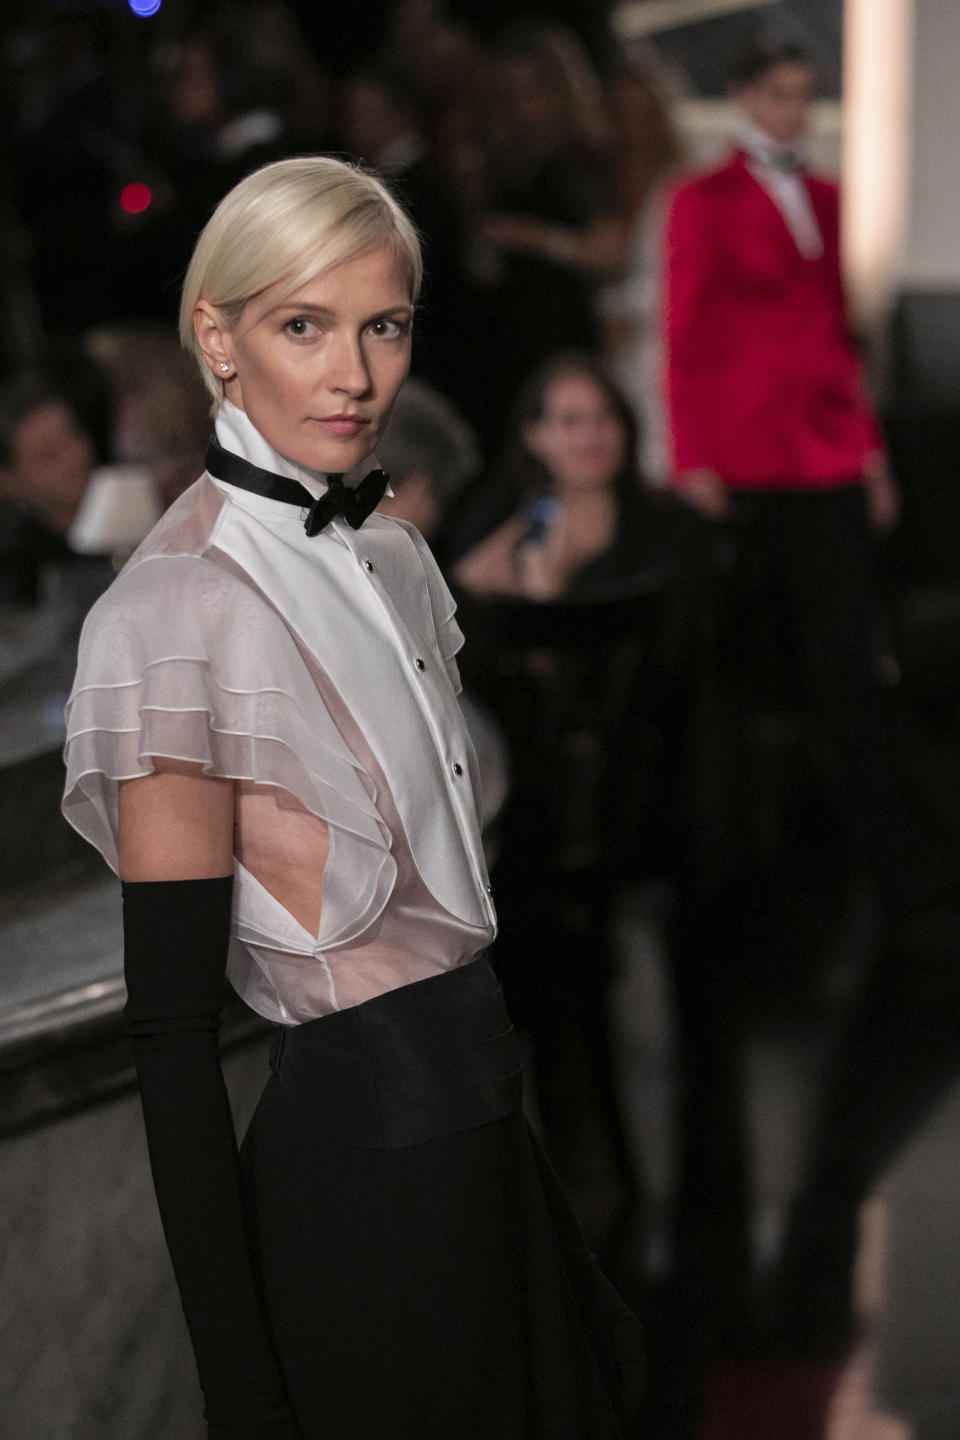 The Ralph Lauren collection is modeled during Fashion Week in New York, Saturday, Sept 7, 2019. (AP Photo/Jeenah Moon)